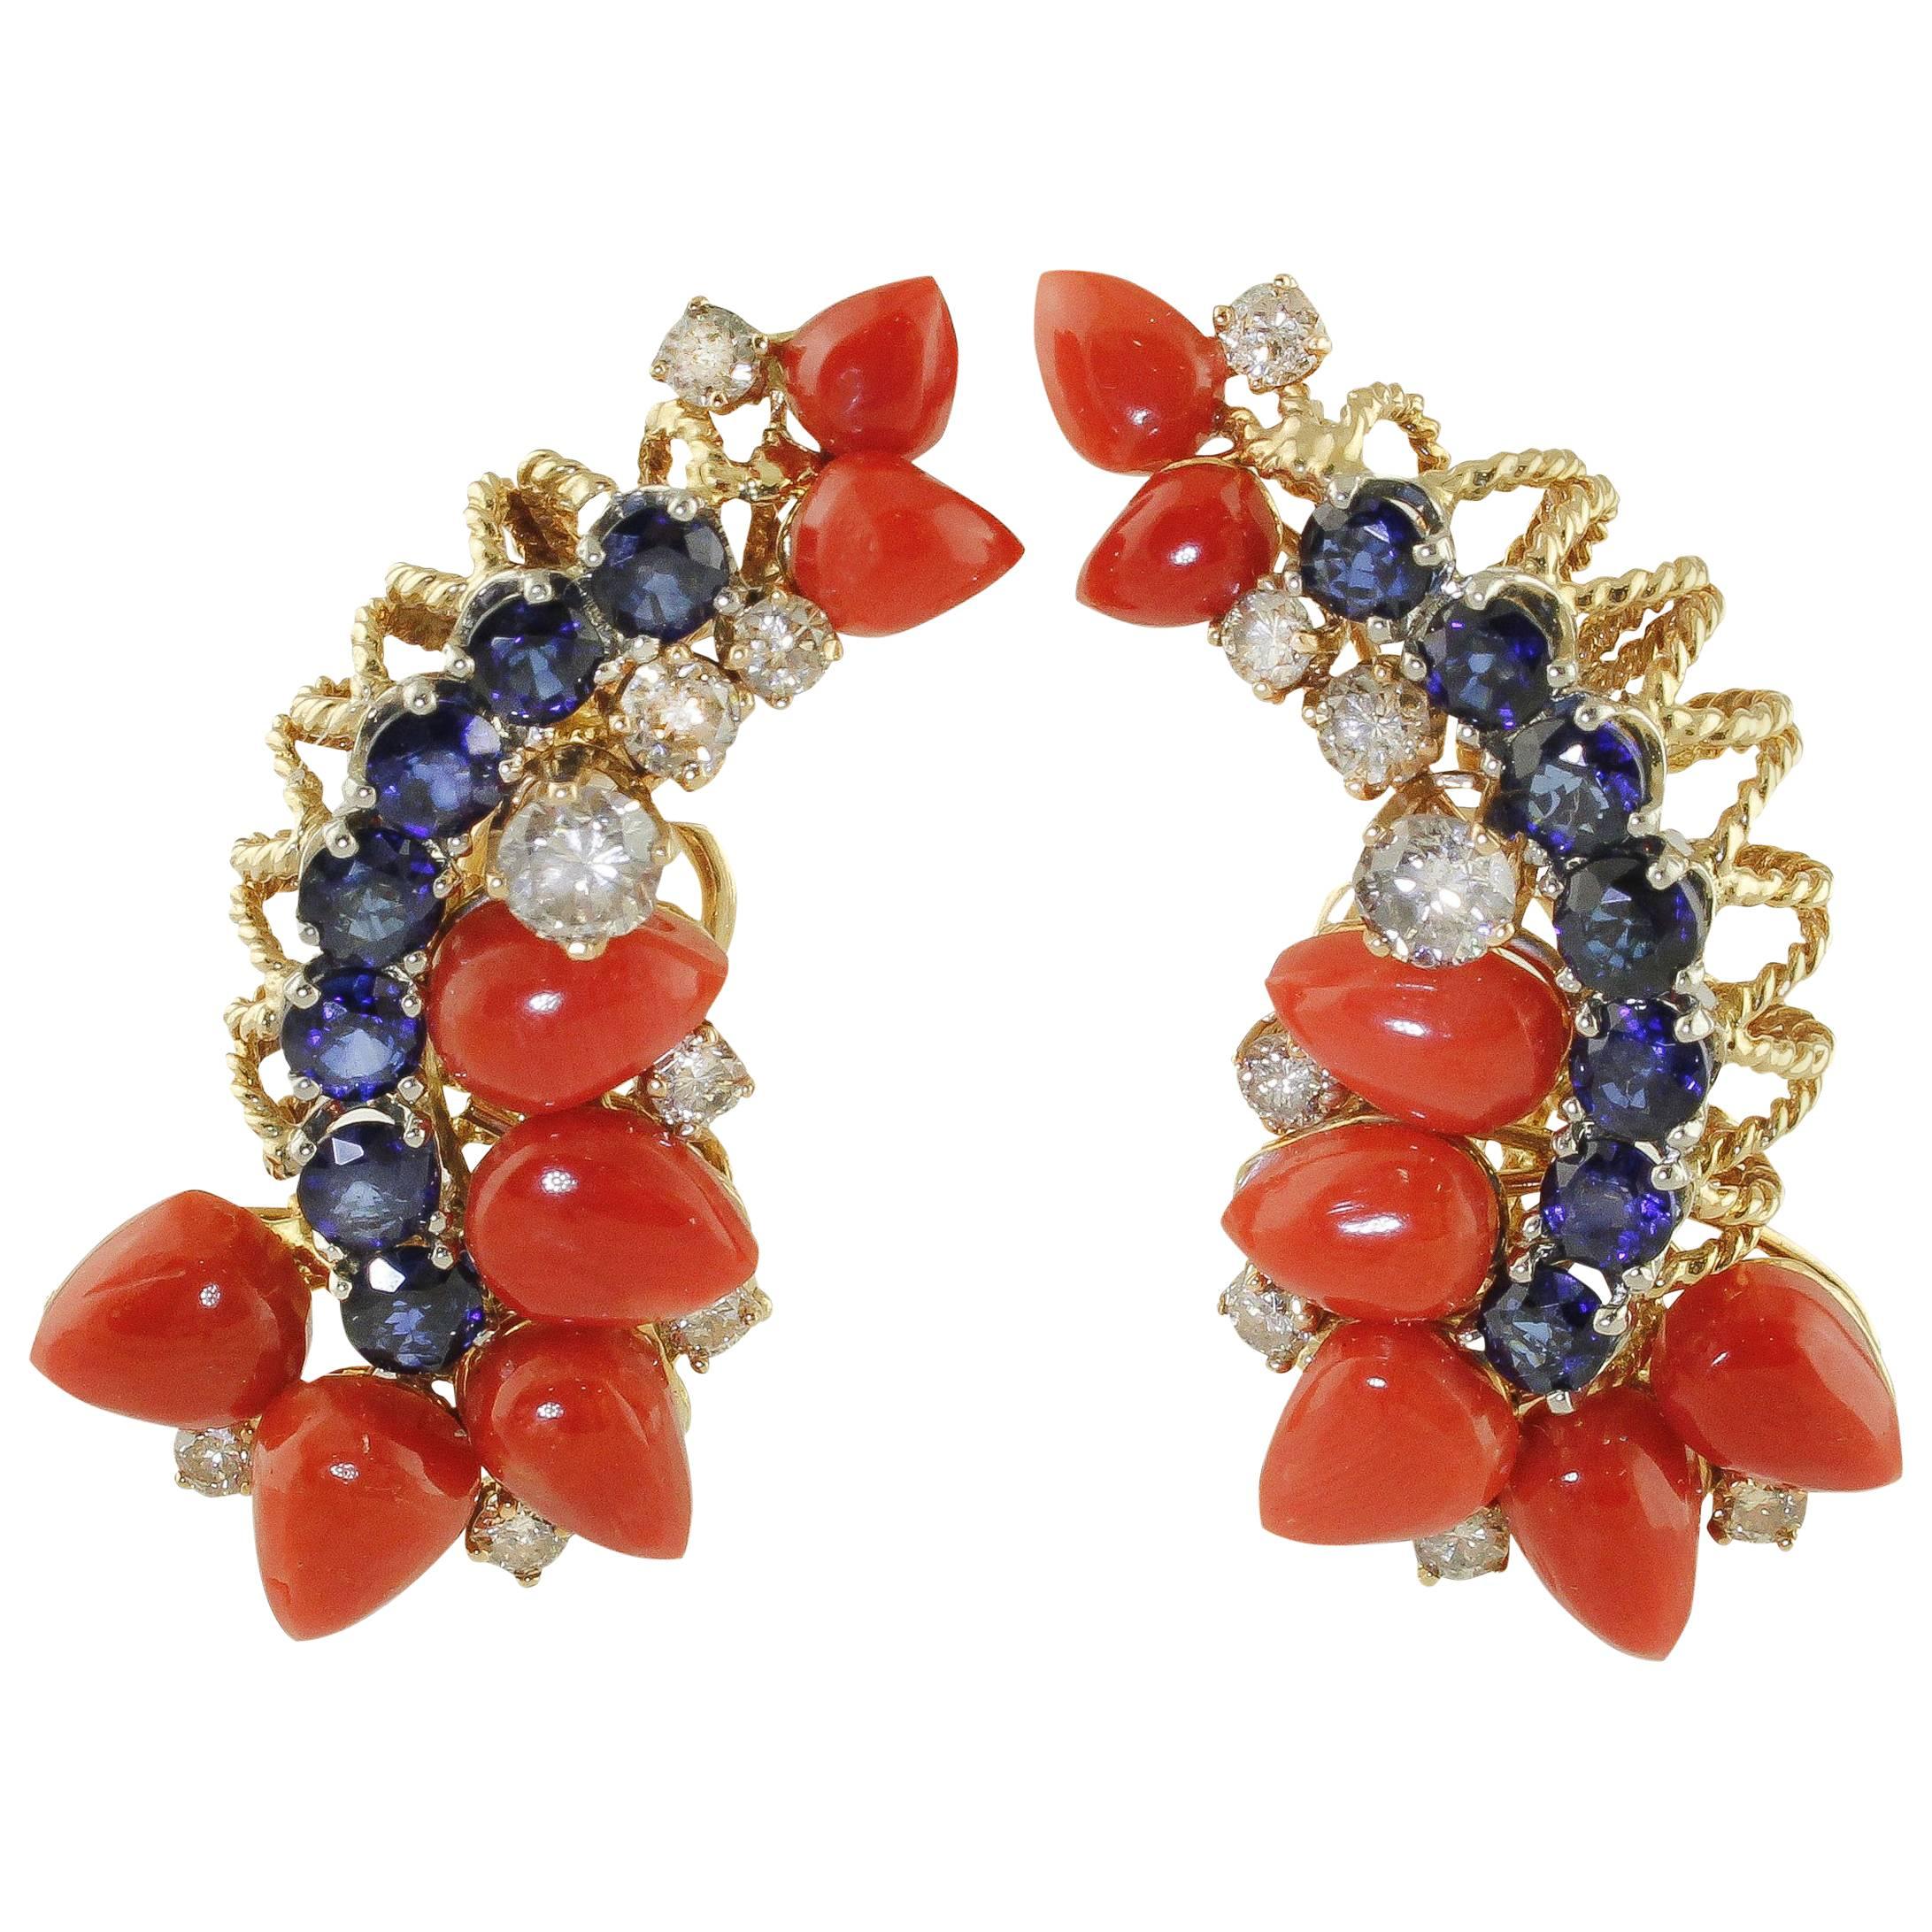 Blue Sapphires, White Diamonds, Red Coral Drops, Rose White Gold Clip-on Earrings